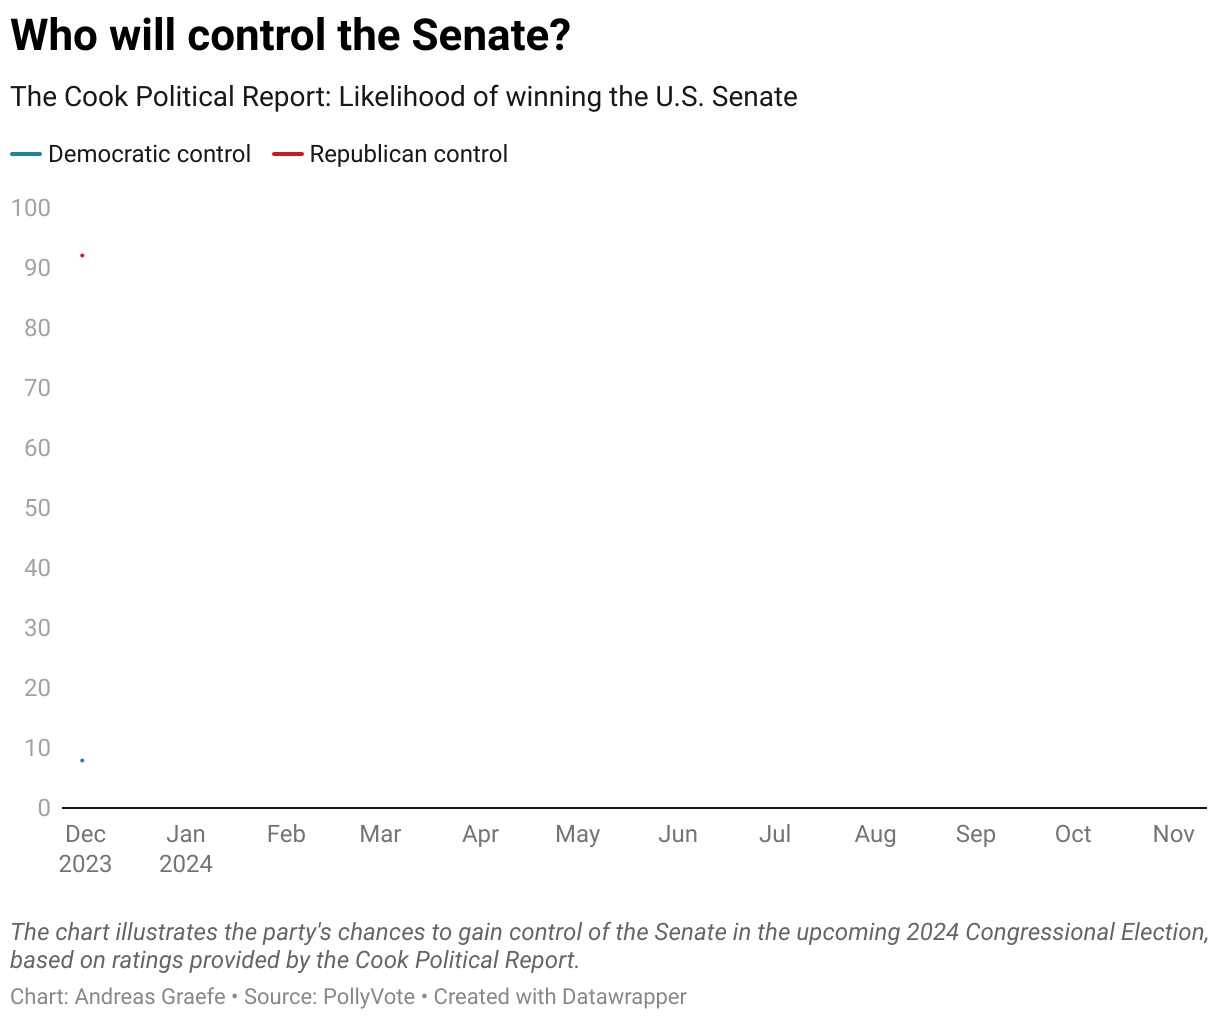 The chart illustrates the party's chances to gain control of the Senate in the upcoming 2024 election, based on ratings provided by Cook Political Report.